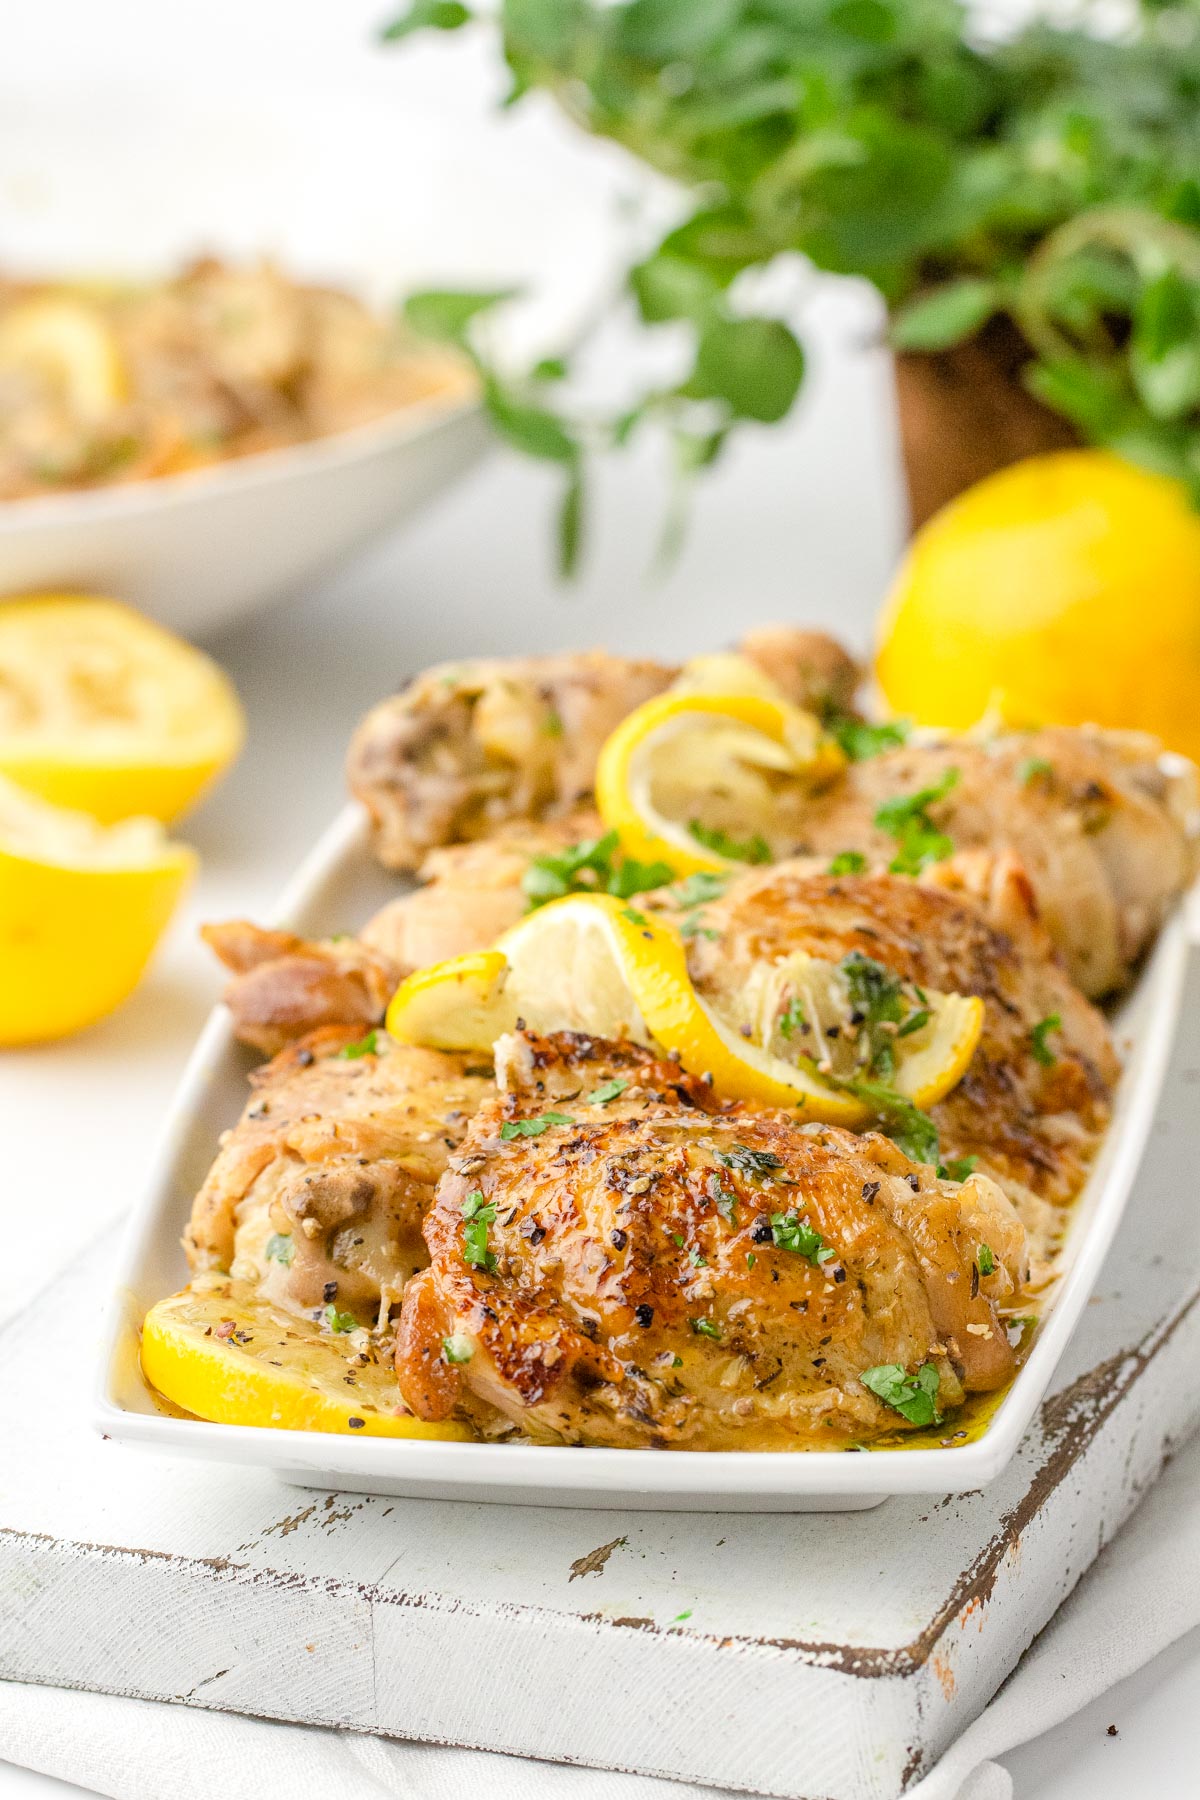 The finished nstant Pot Lemon Chicken Thighs on a white platter garnished with lemon wedges.